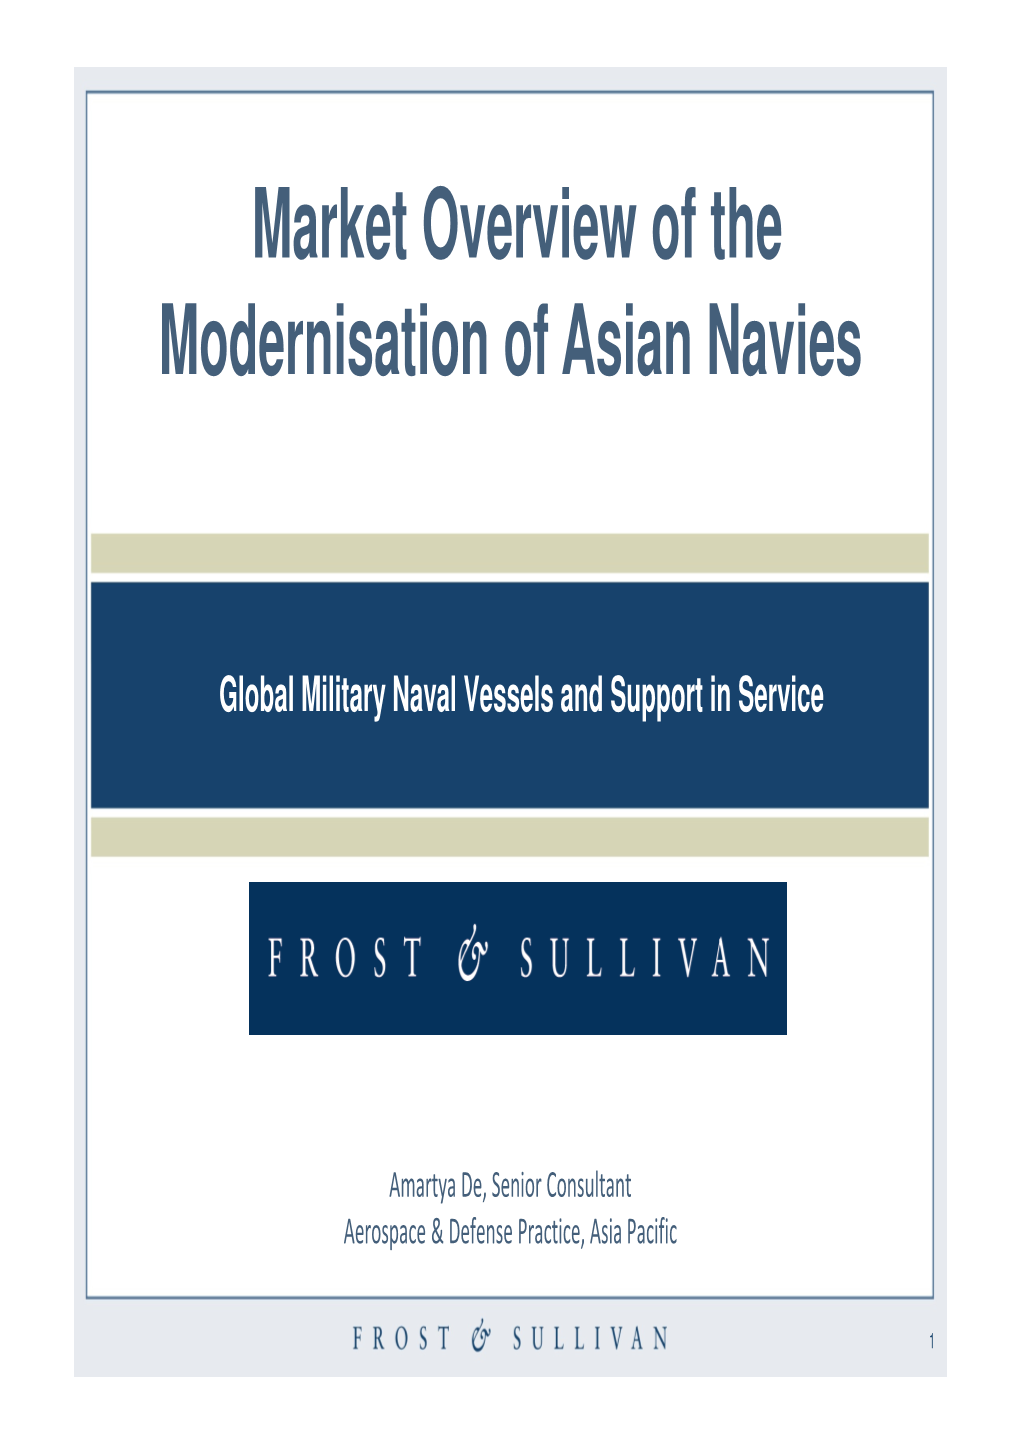 Market Overview of the Modernisation of Asian Navies